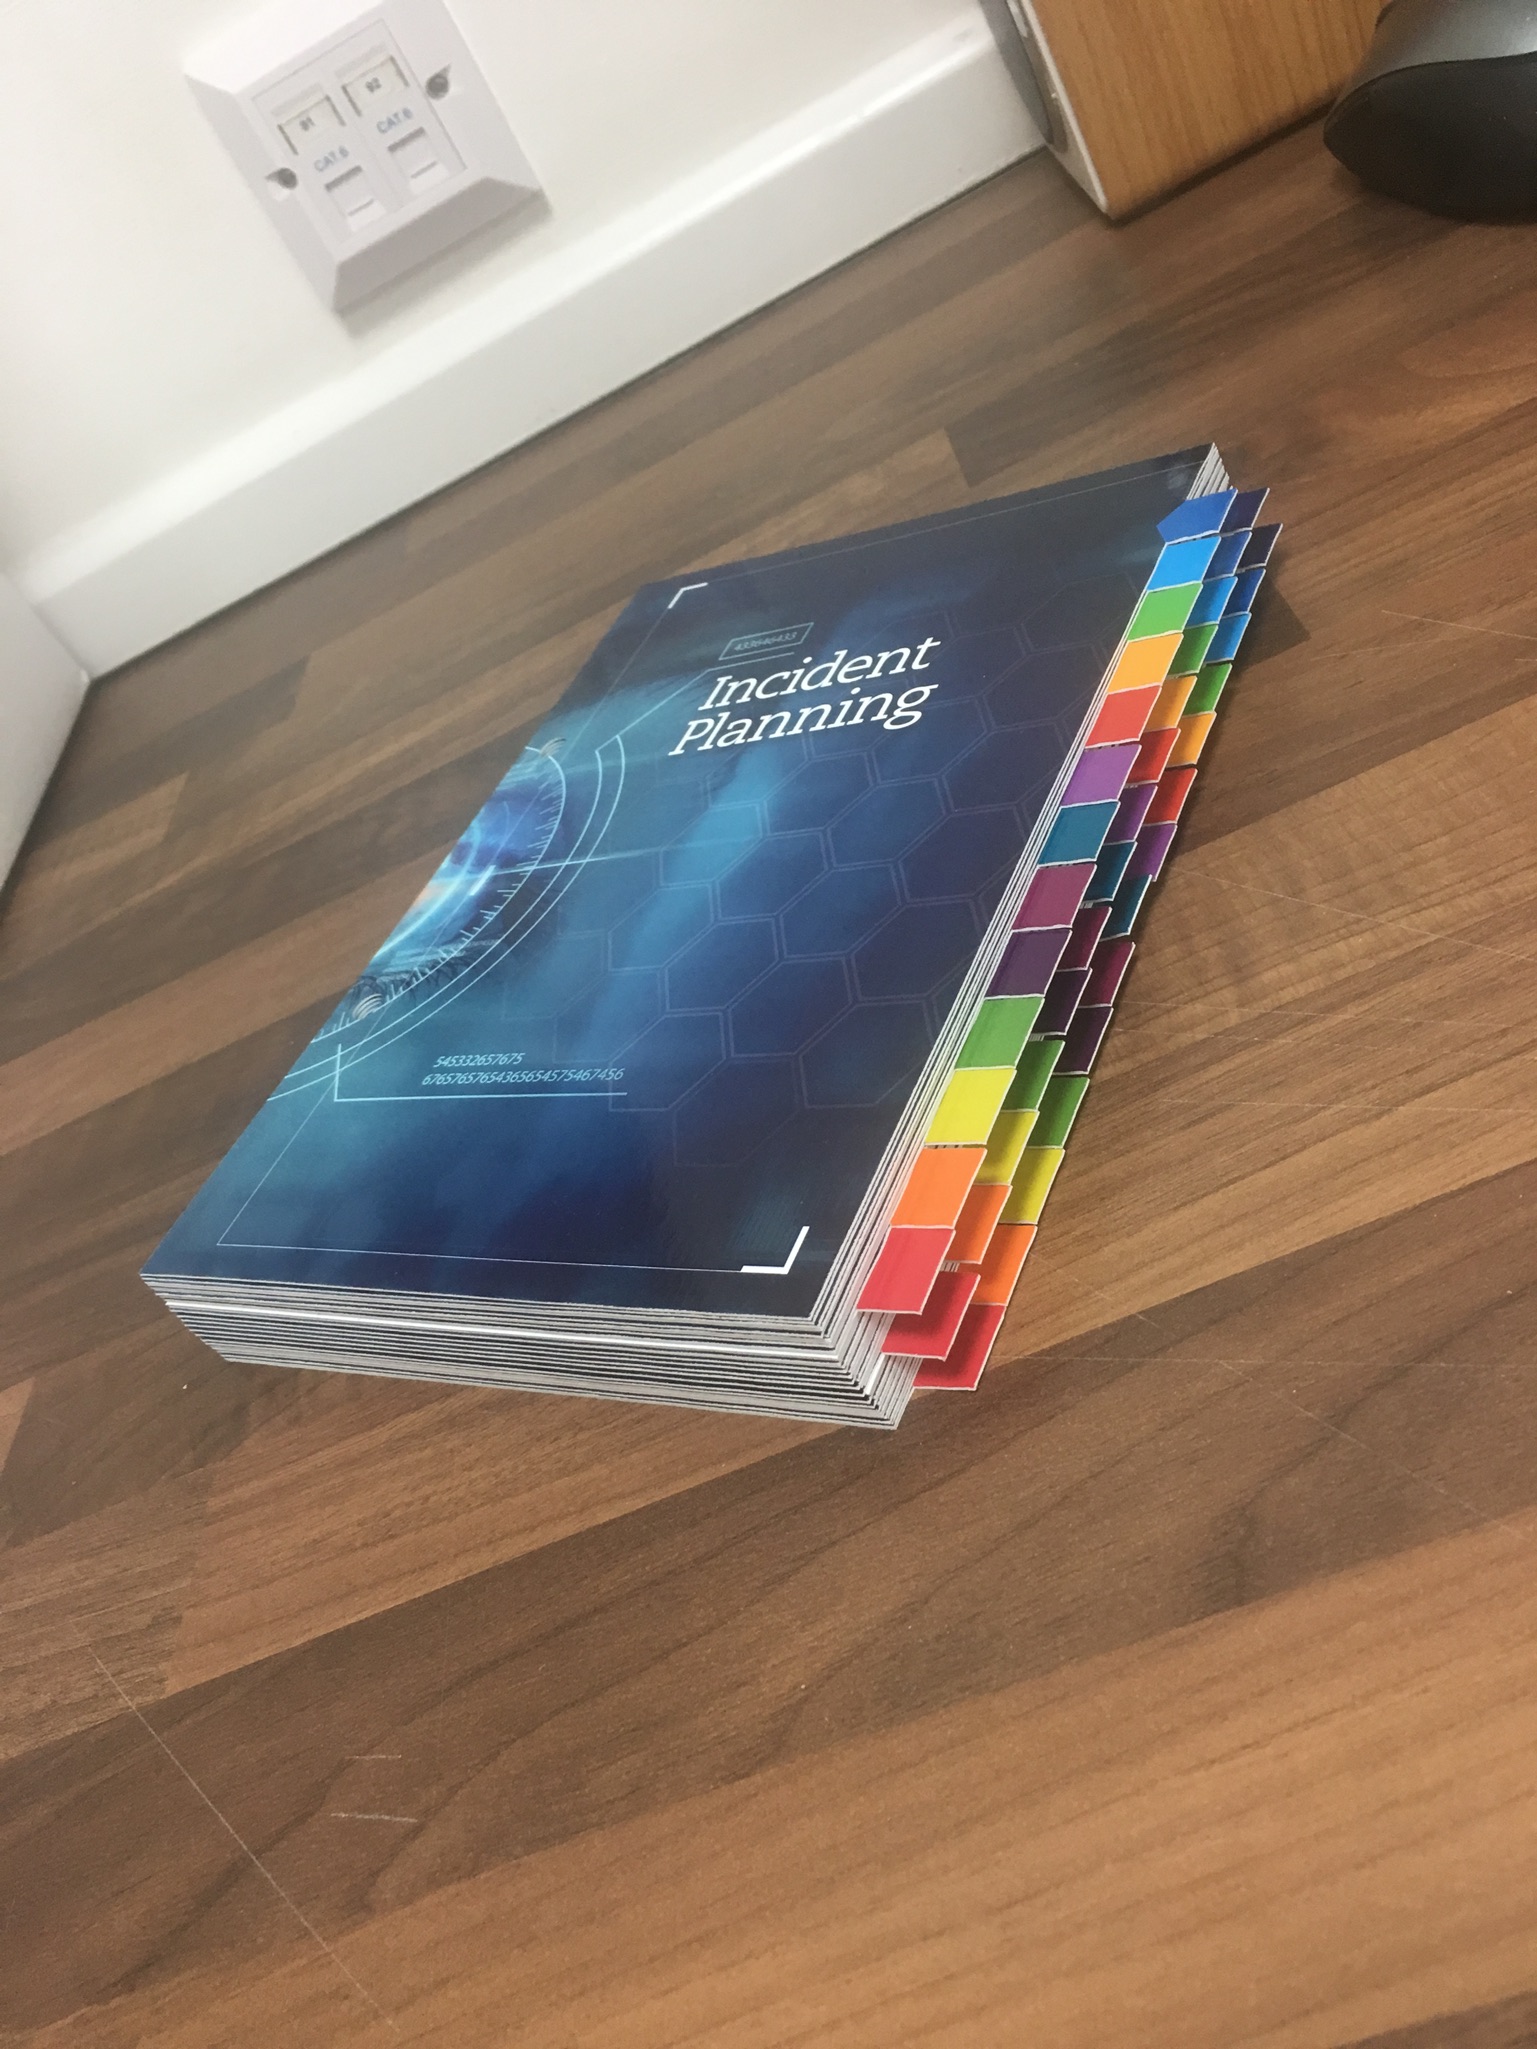 Digitally printed incident planning notepad on the front cover with multiple page markers on the side